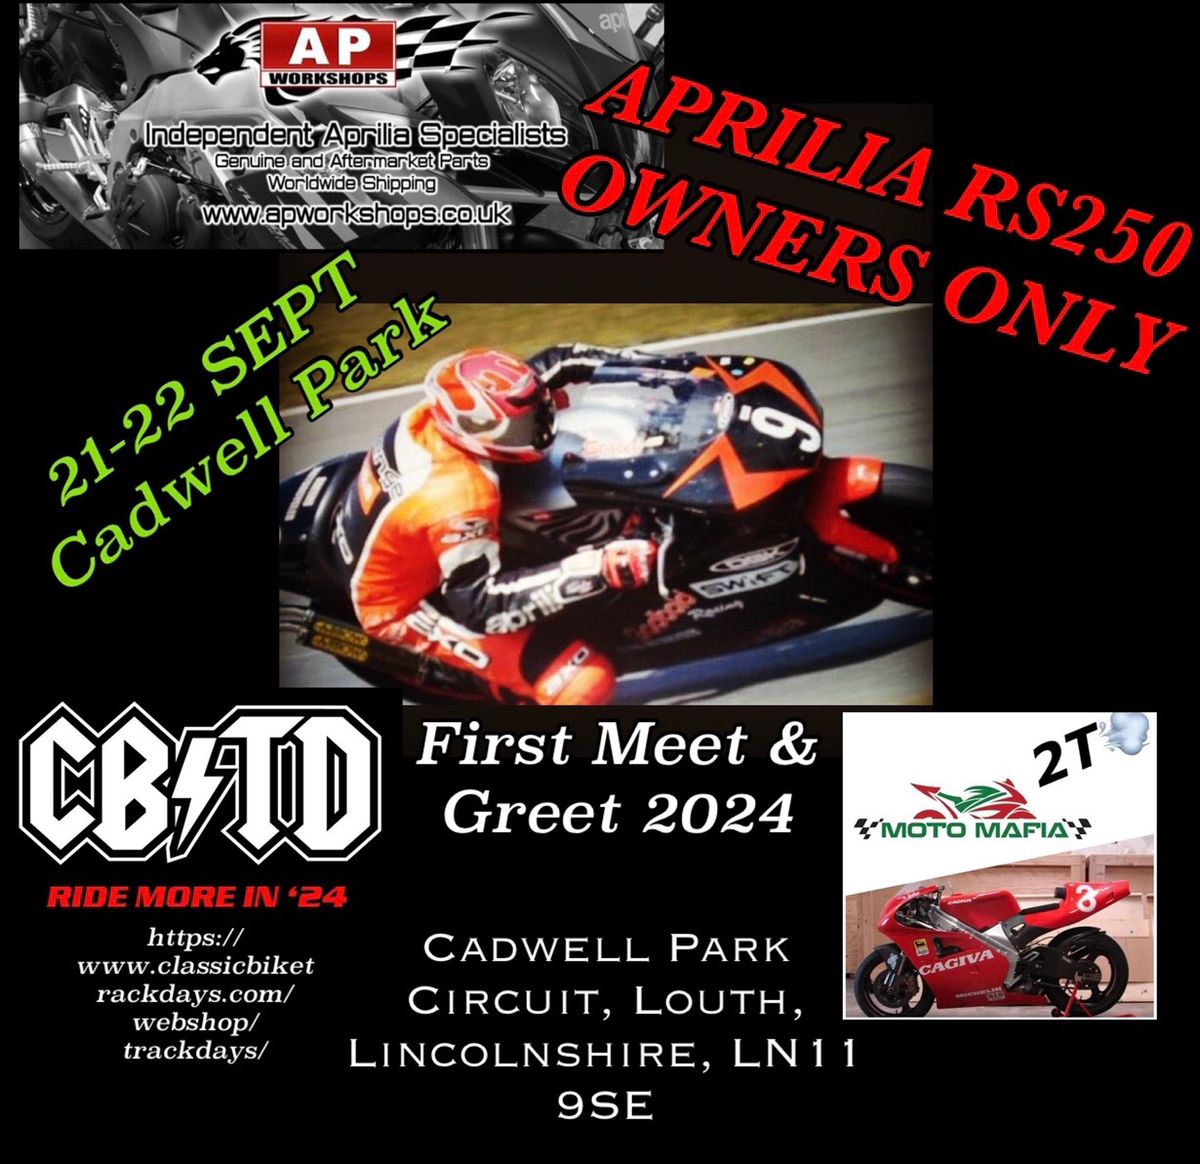 First Aprilia RS250 Owners Group Meet